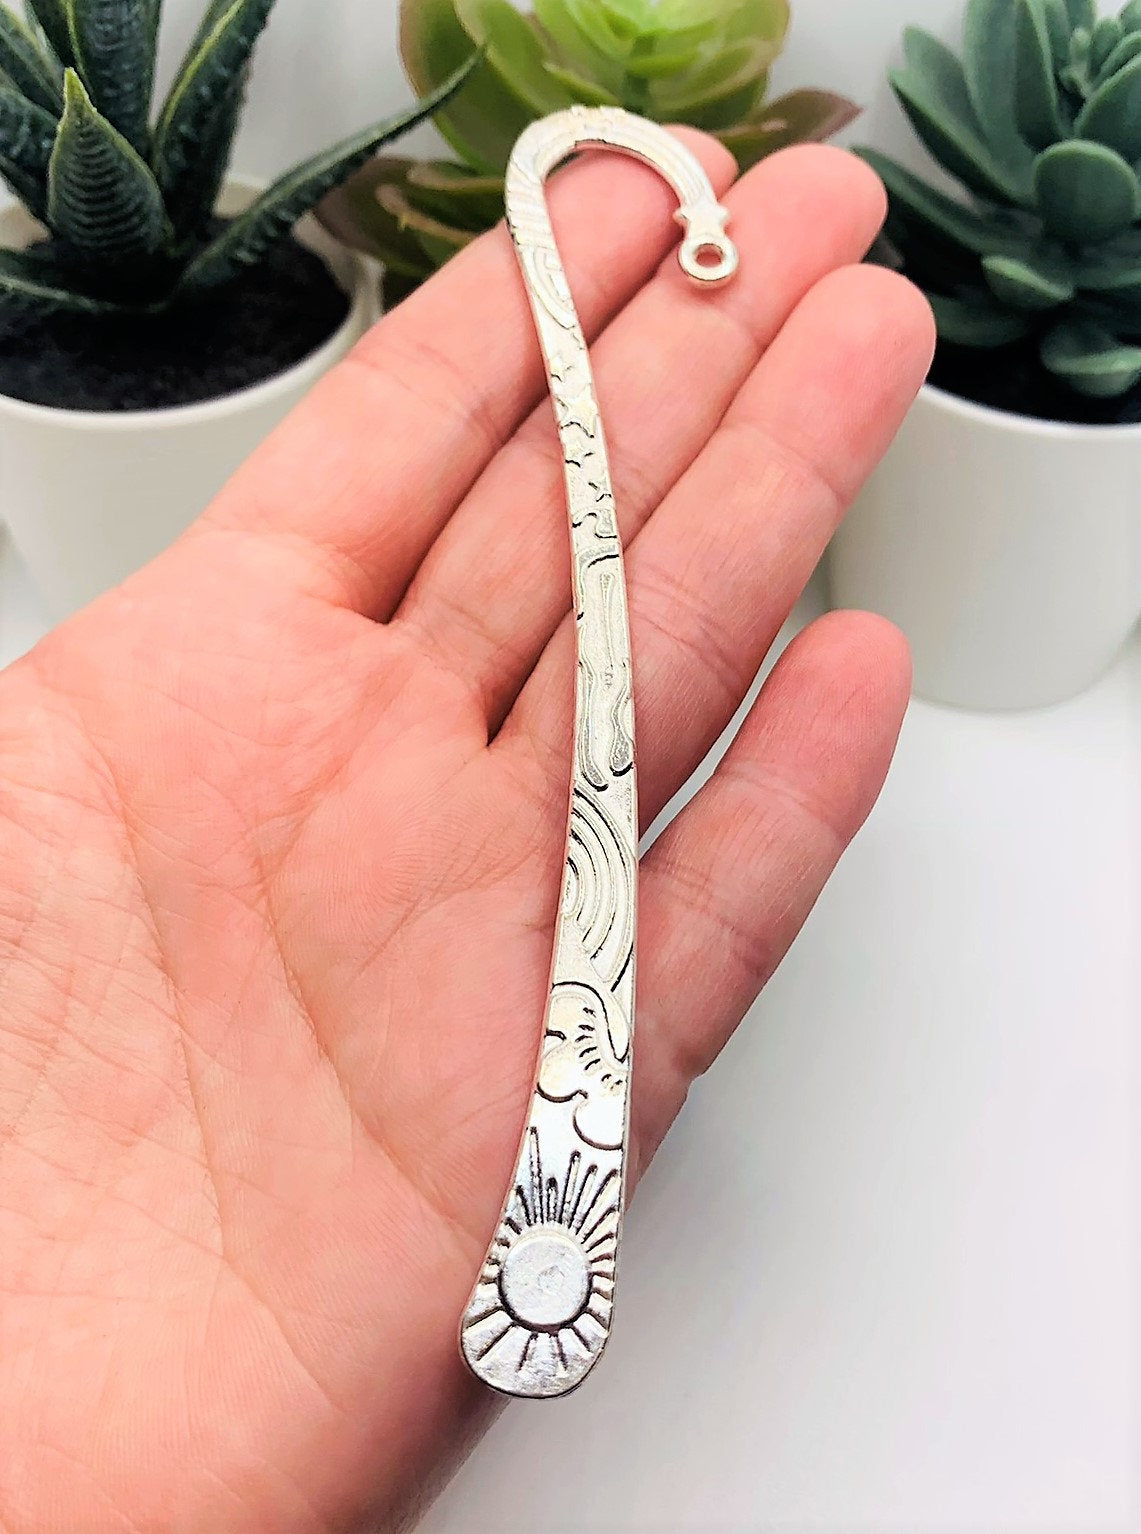 1, 4 or 20 Pieces: Silver Plated Sun and Moon Bookmark Base